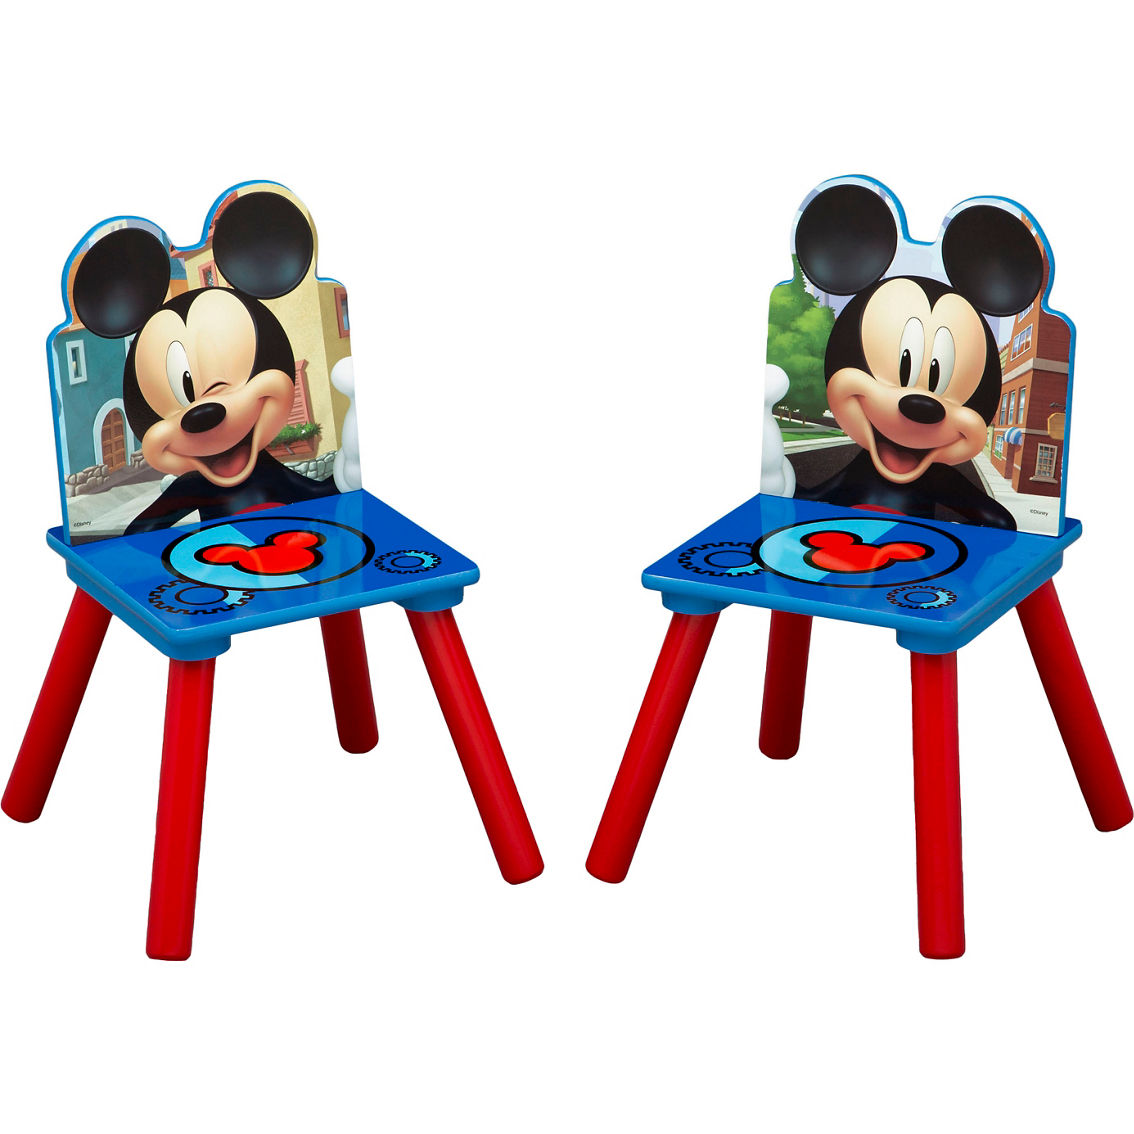 Disney Mickey Mouse Table and Chair Set with Storage - Image 3 of 5